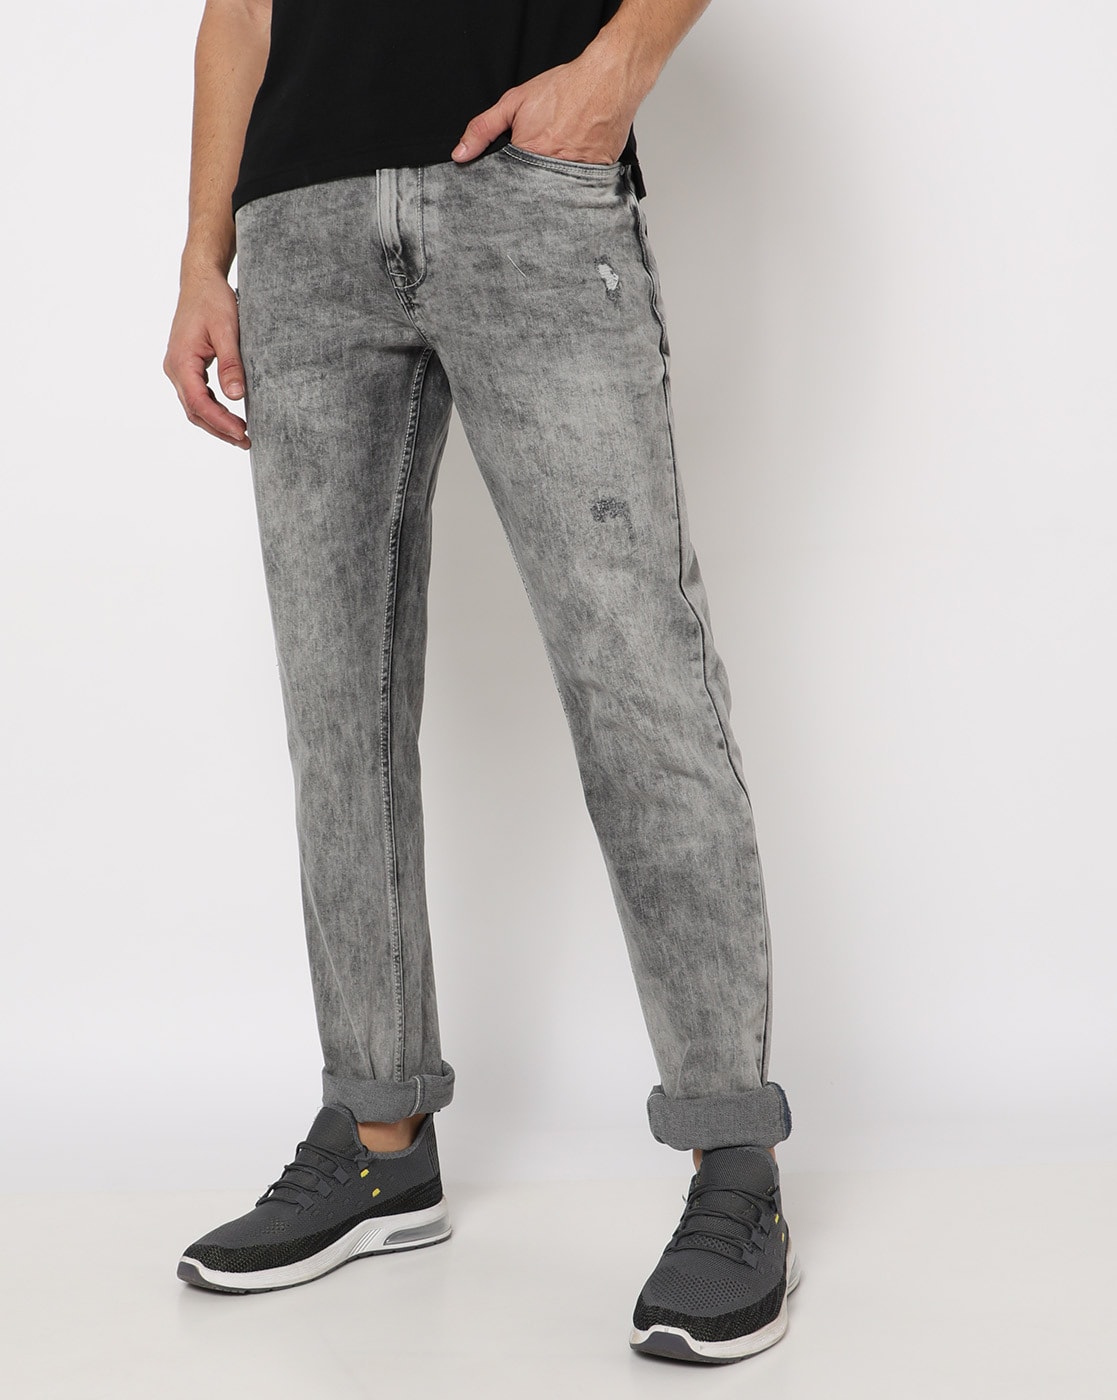 Buy Grey Jeans for Men by GAS Online | Ajio.com